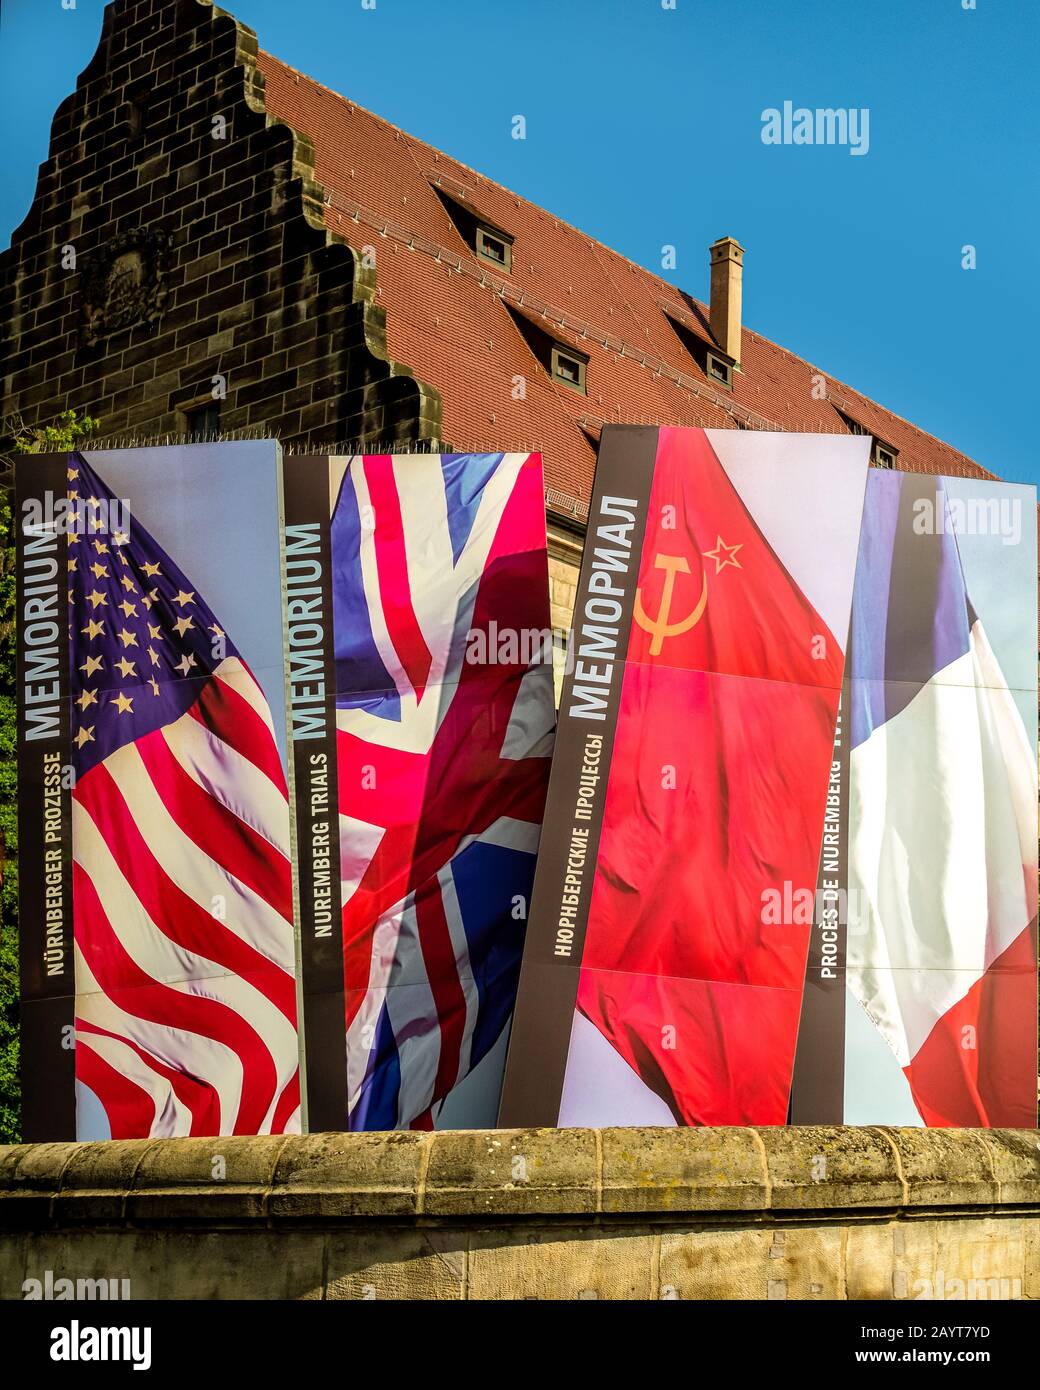 NUREMBERG, GERMANY - JULY 10, 2019:  The flags of the four Allied Powers outside the Nuremburg courthouse commemorating the Nuremberg trials Stock Photo